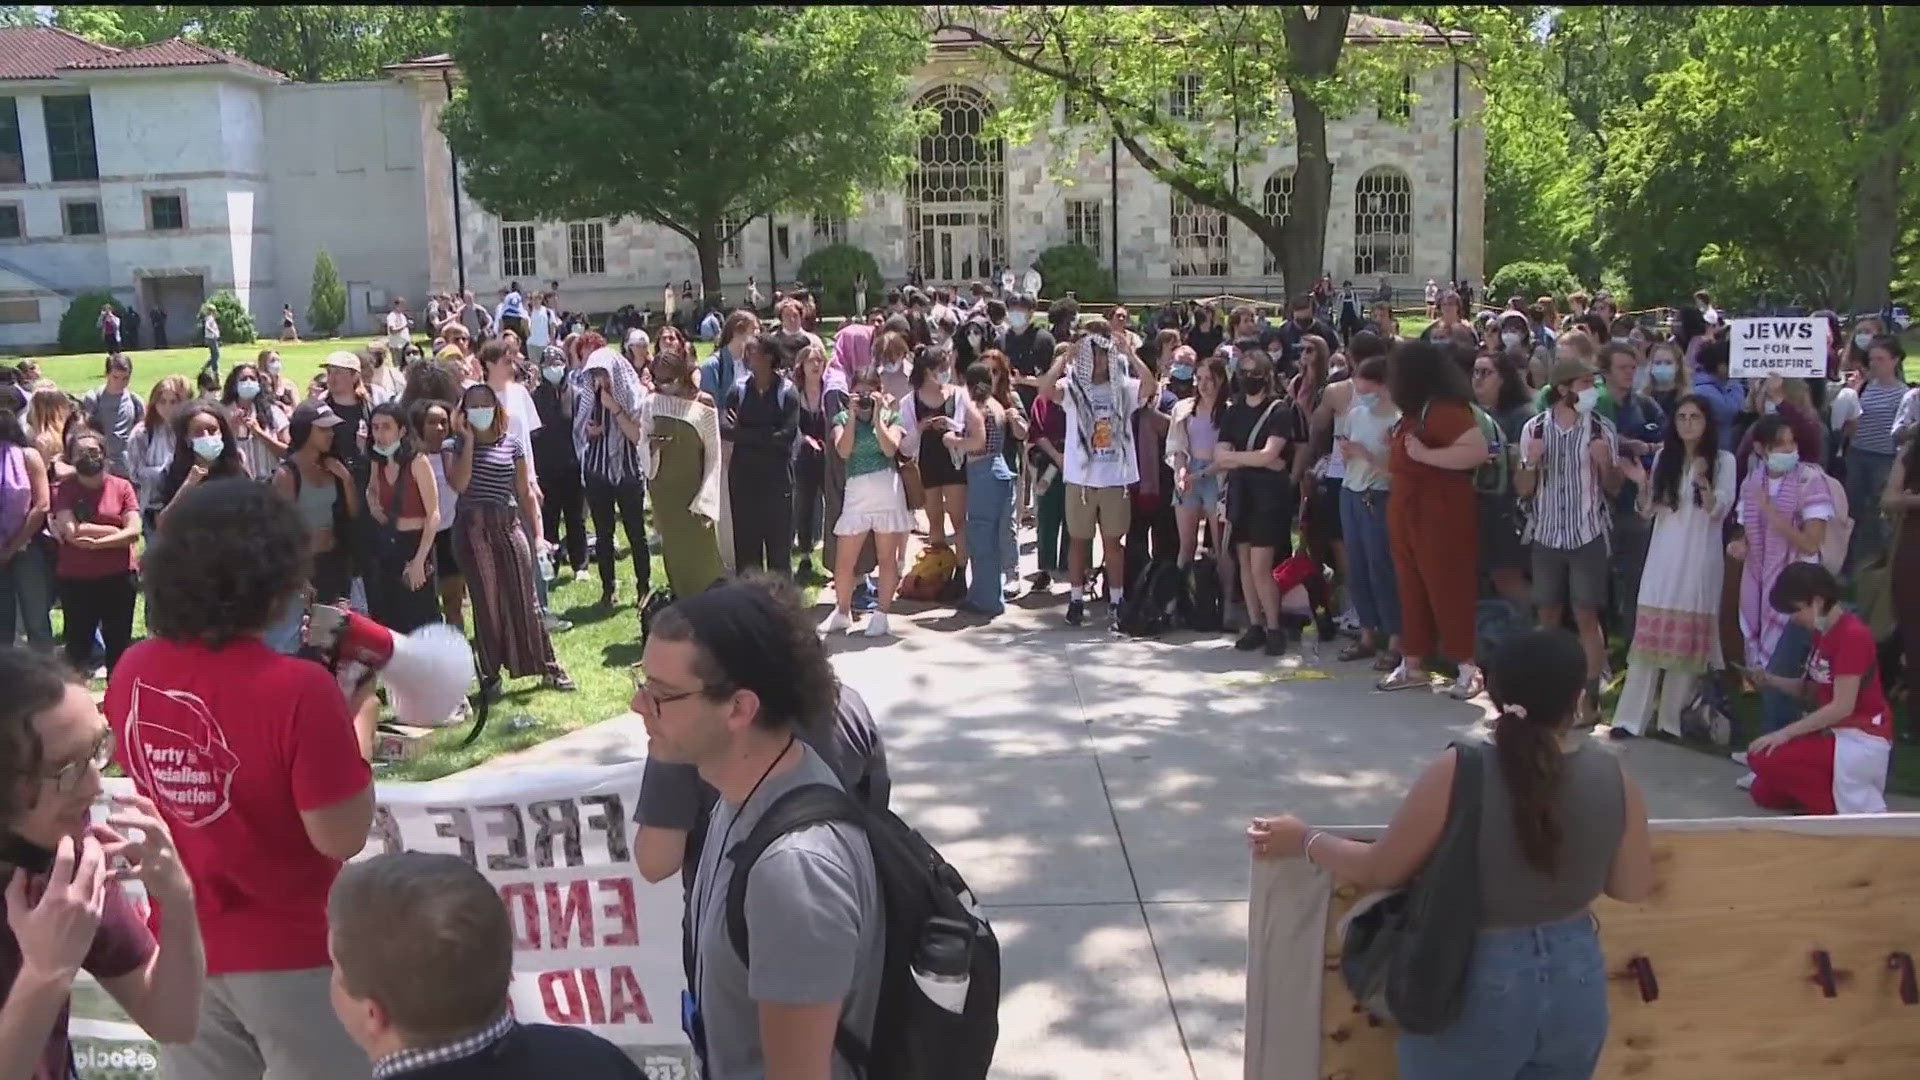 It's been nearly a week since a protest turned violent on the campus.